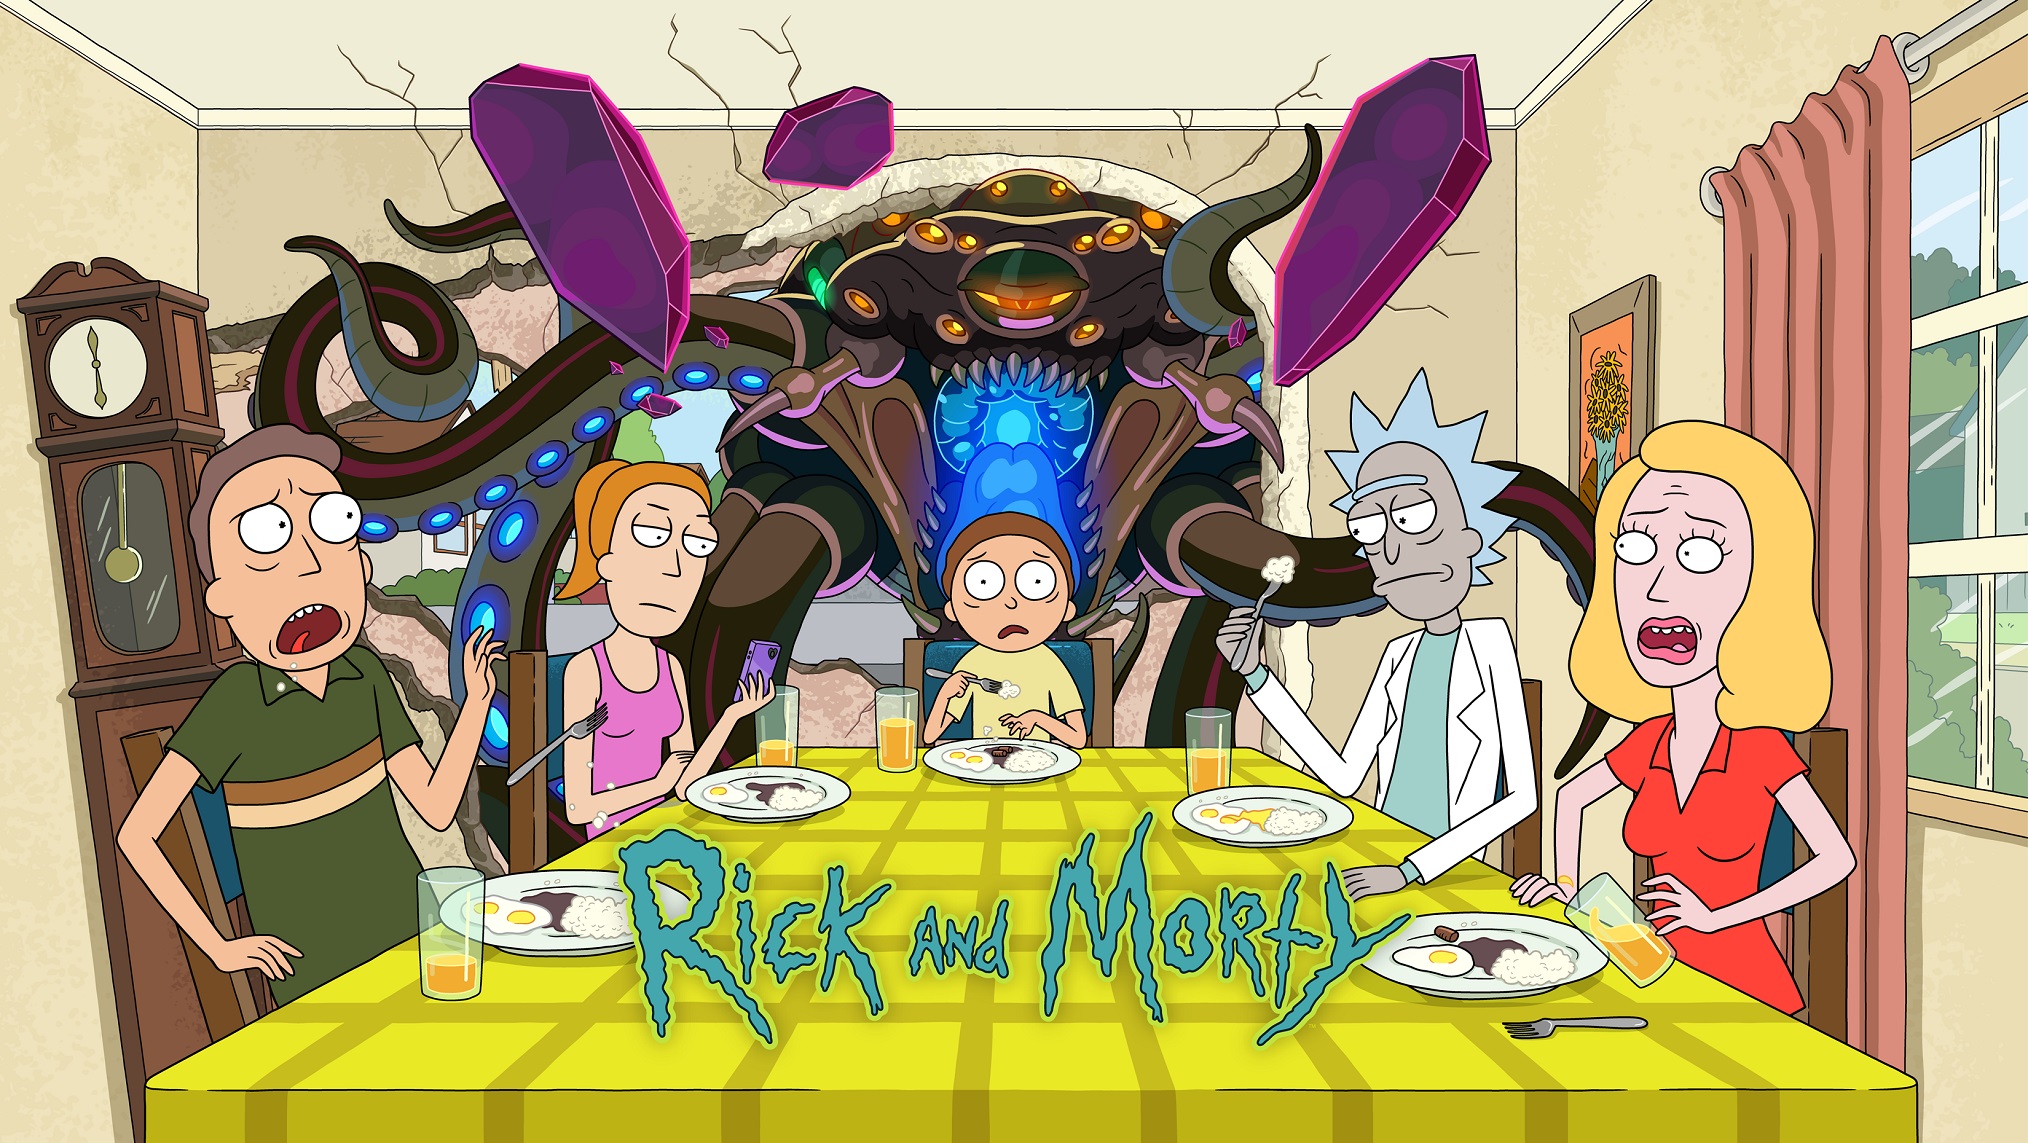 Rick And Morty Season 5 Premiere Date Announced And First Look Trailer Released Video